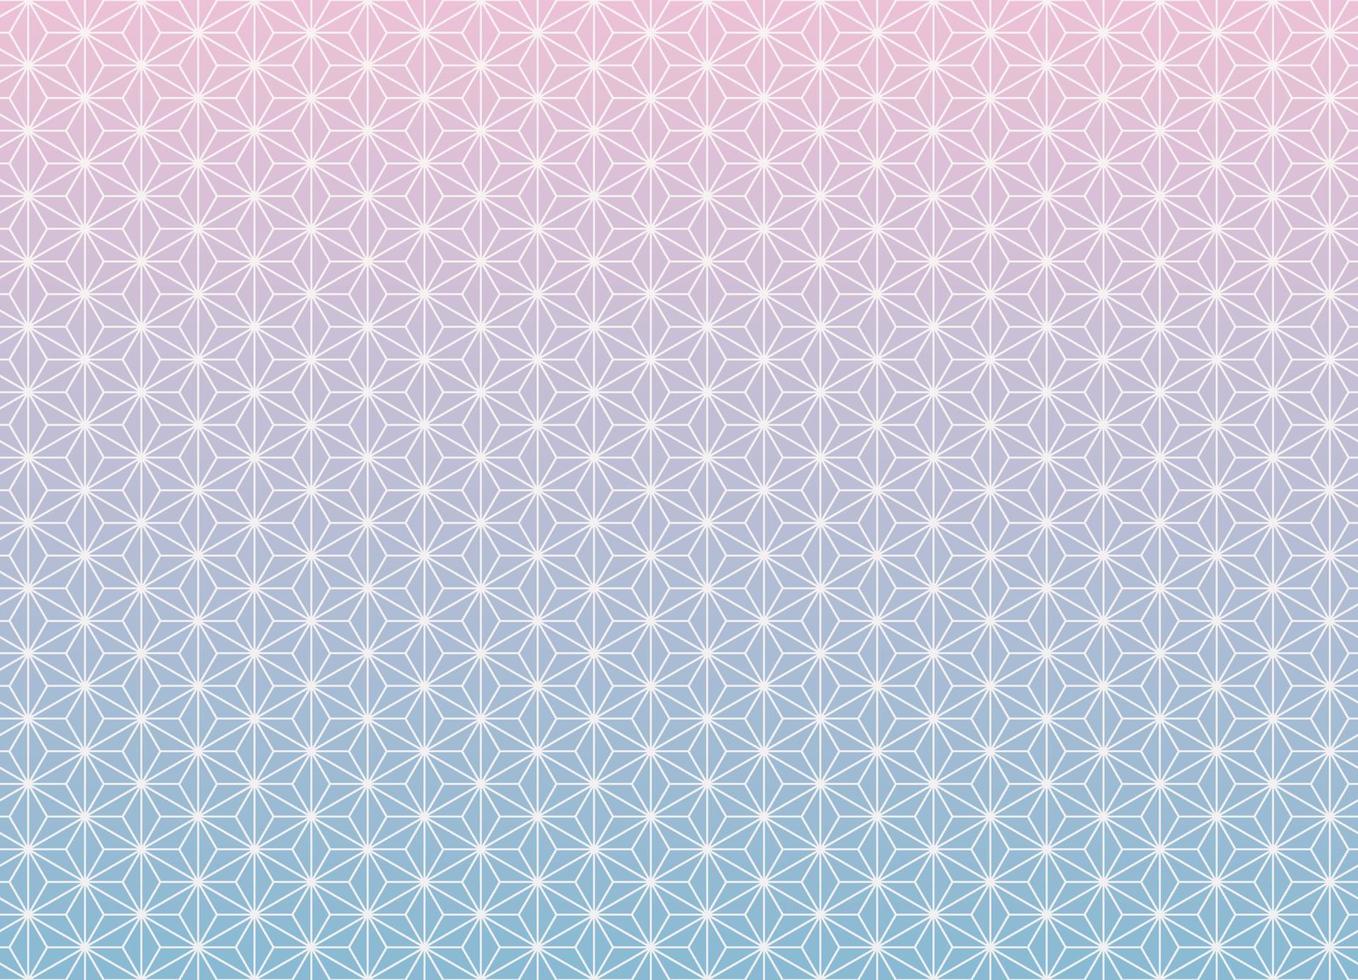 Asanoha Japanese traditional pattern with gentle feminine blue pink gradient color background. Use for fabric, textile, cover, wrapping, decoration elements. vector